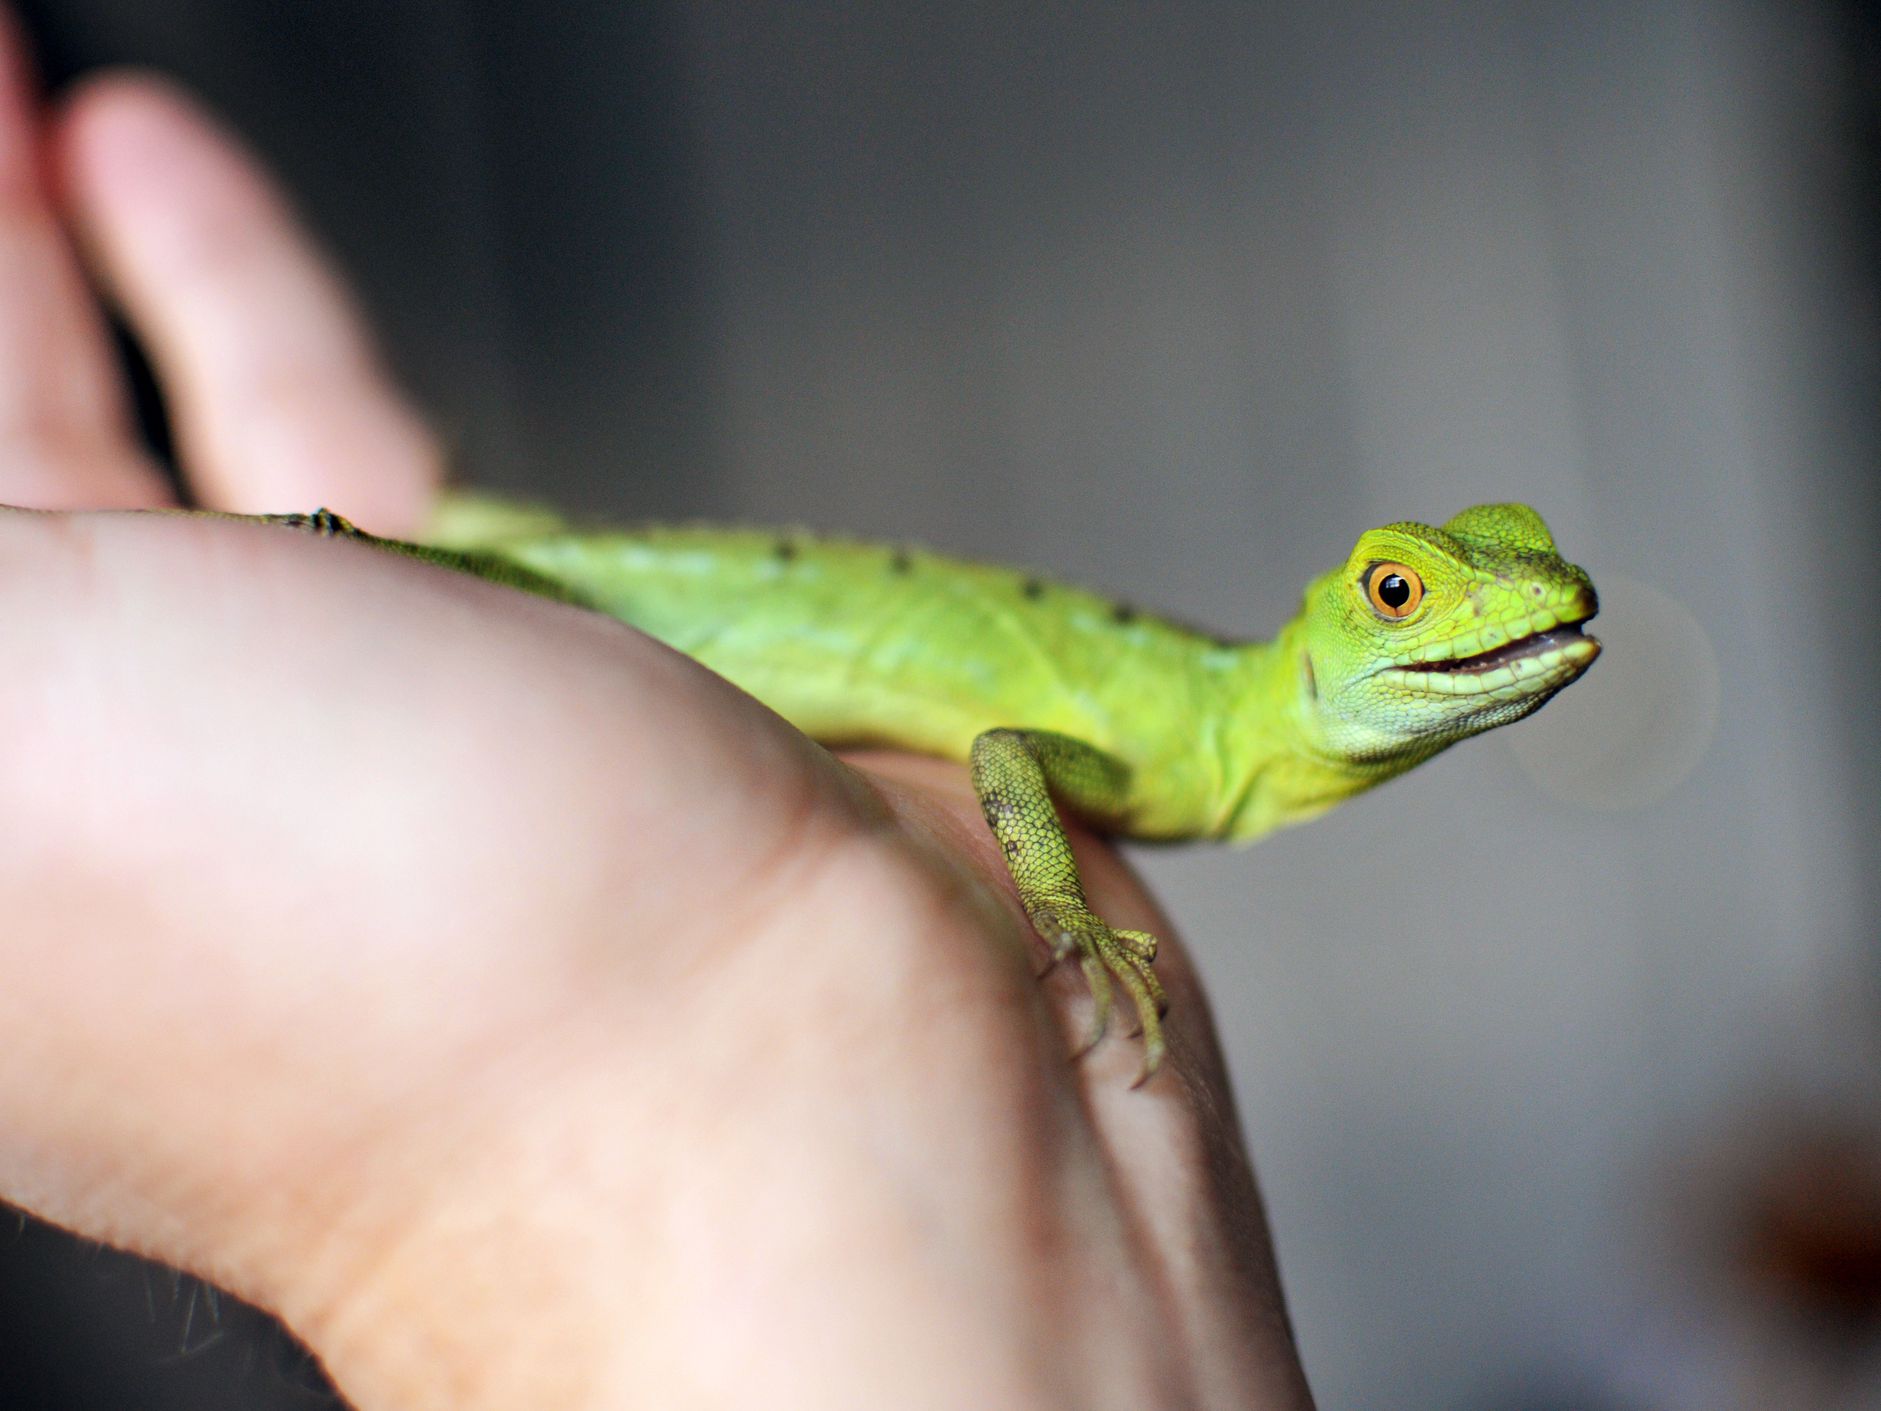 What is the smallest lizard you can have as a pet?